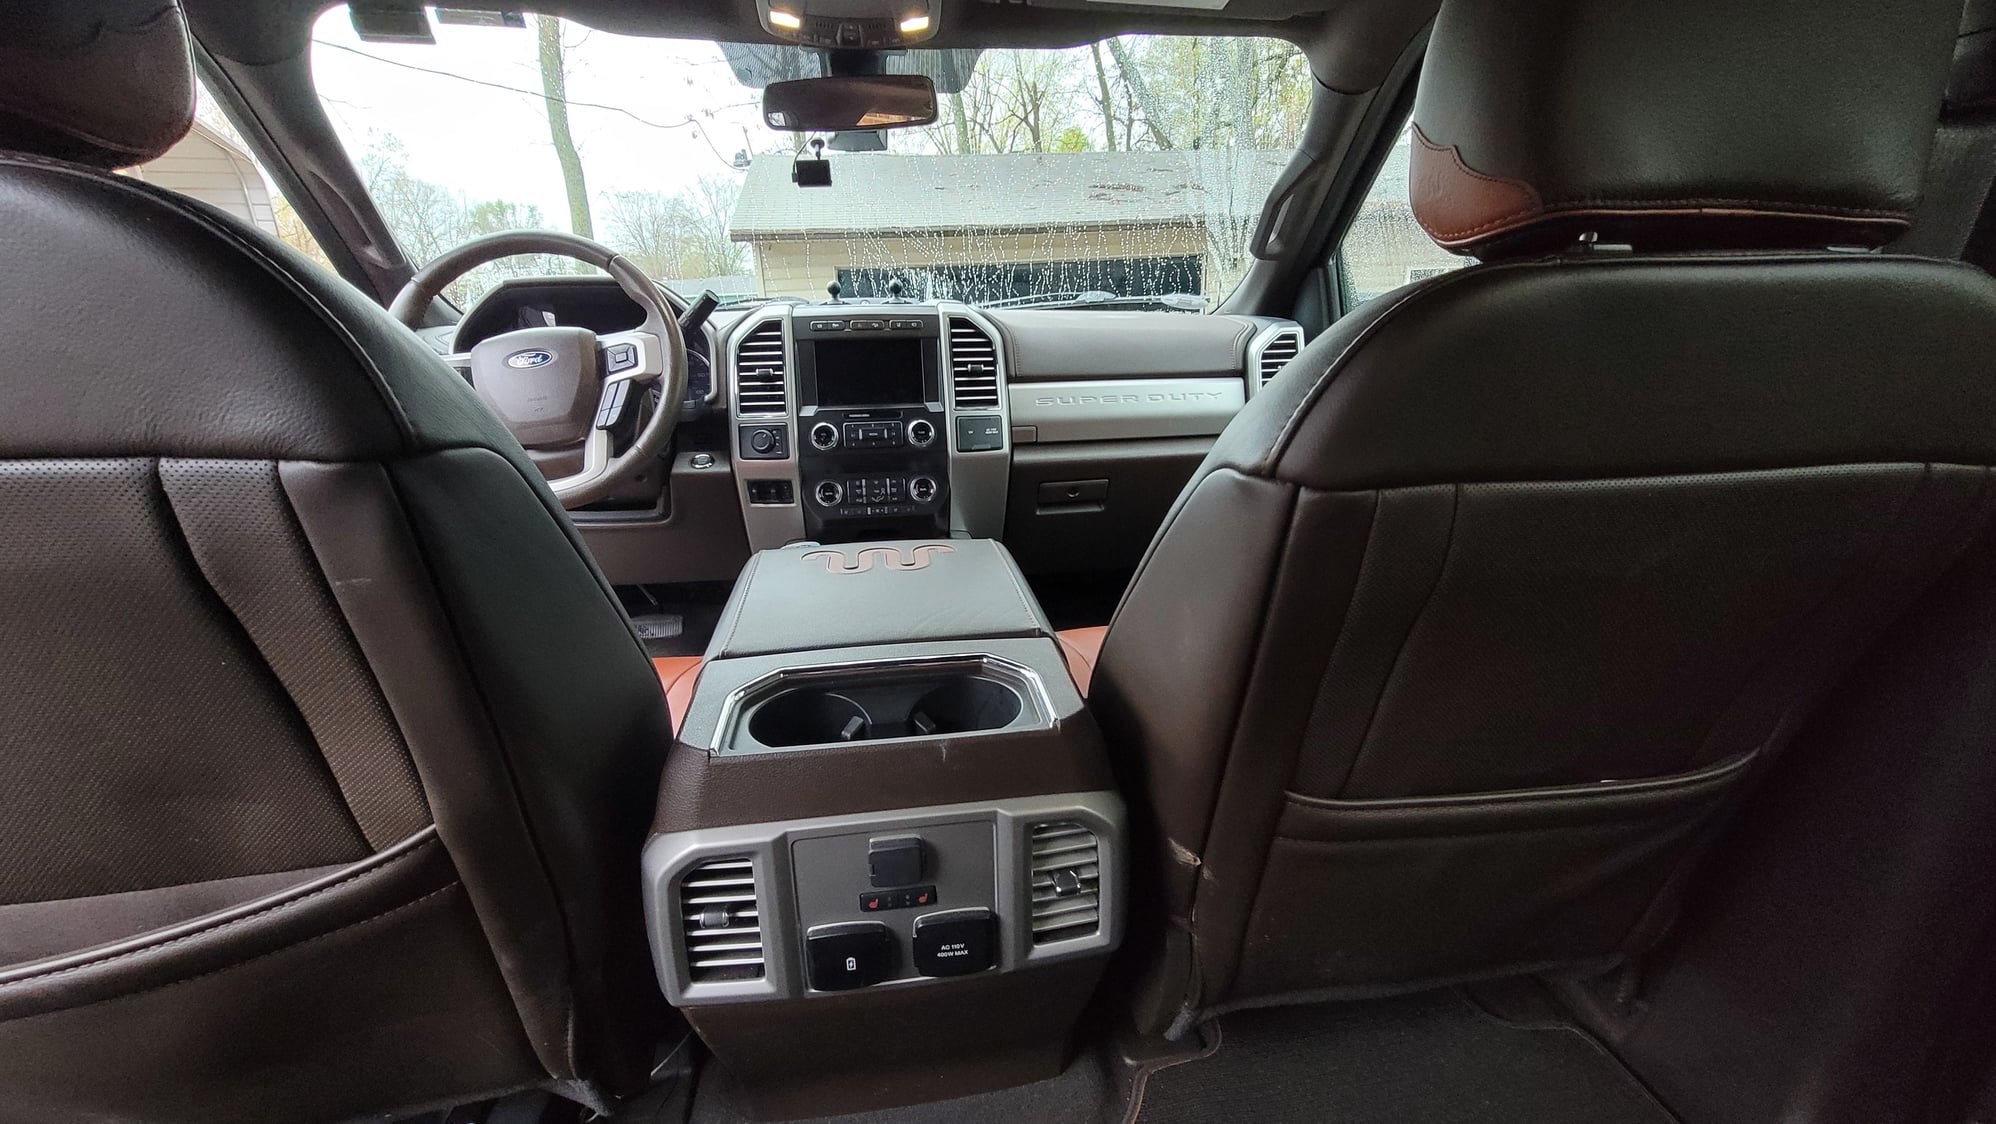 2019 Ford F-350 Super Duty - King Ranch Dually, low mileage with ESP! - Used - VIN 1FT8W3DT0KEE80246 - 35,000 Miles - 8 cyl - 4WD - Automatic - Truck - Black - Clarksville, TN 37042, United States